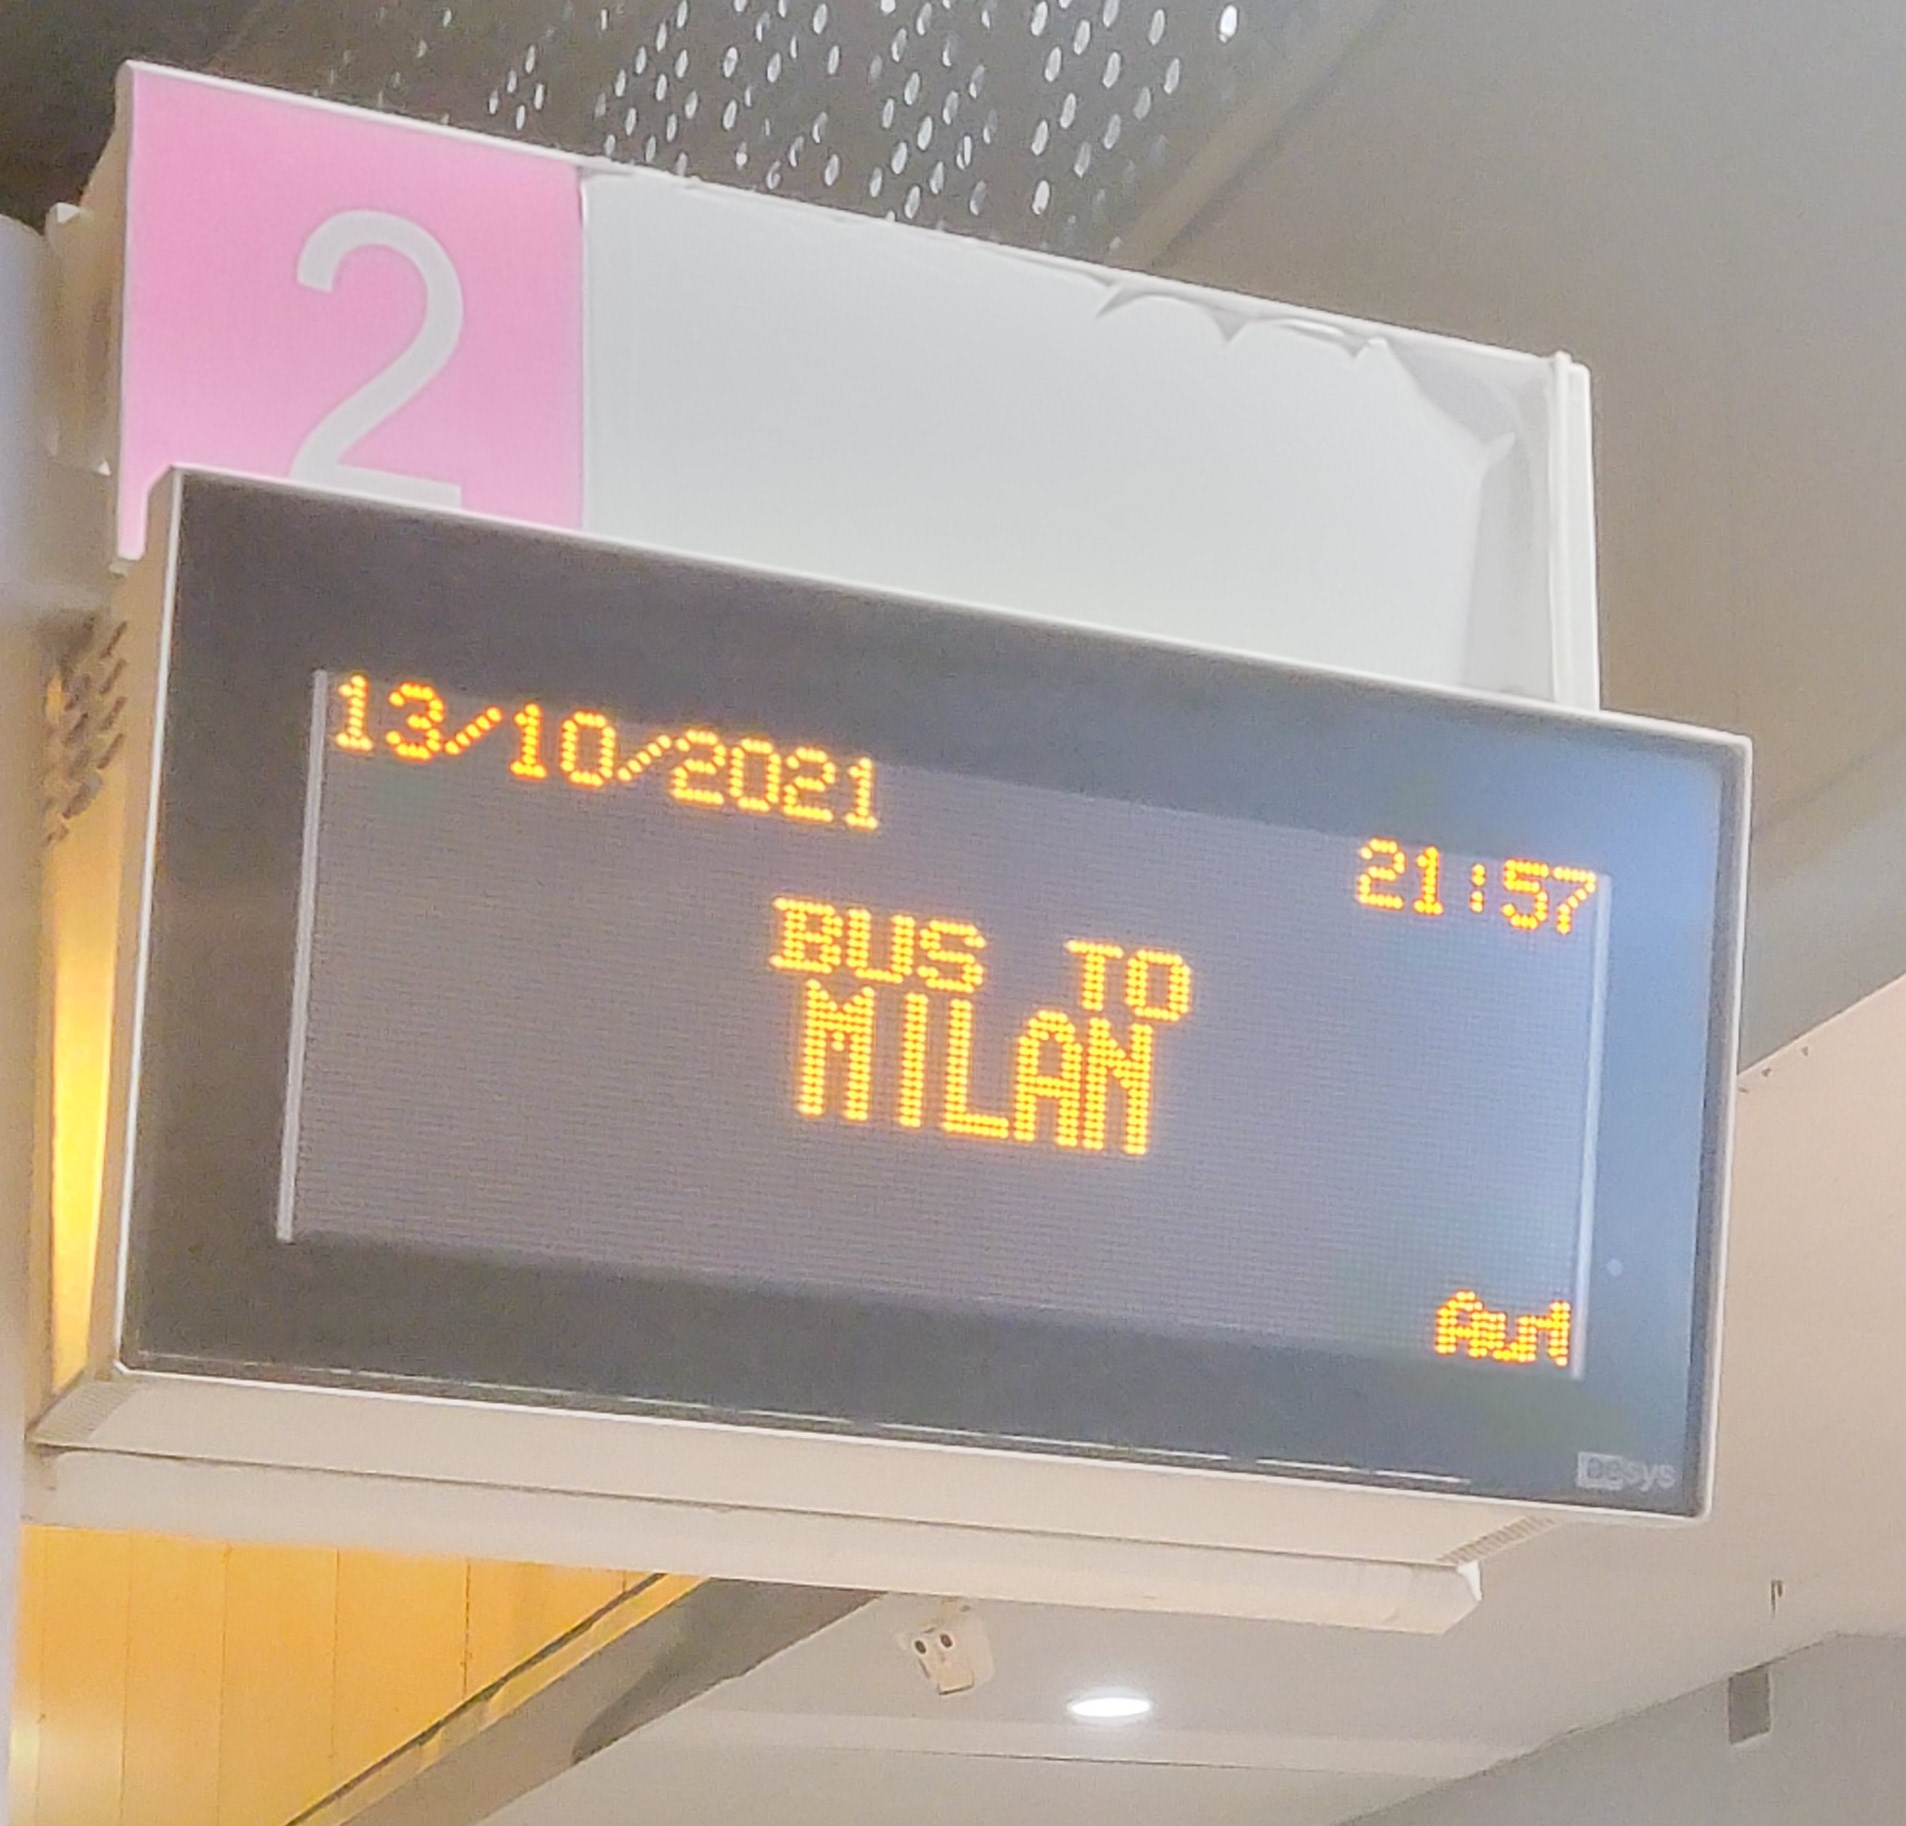 a digital sign with a date and time